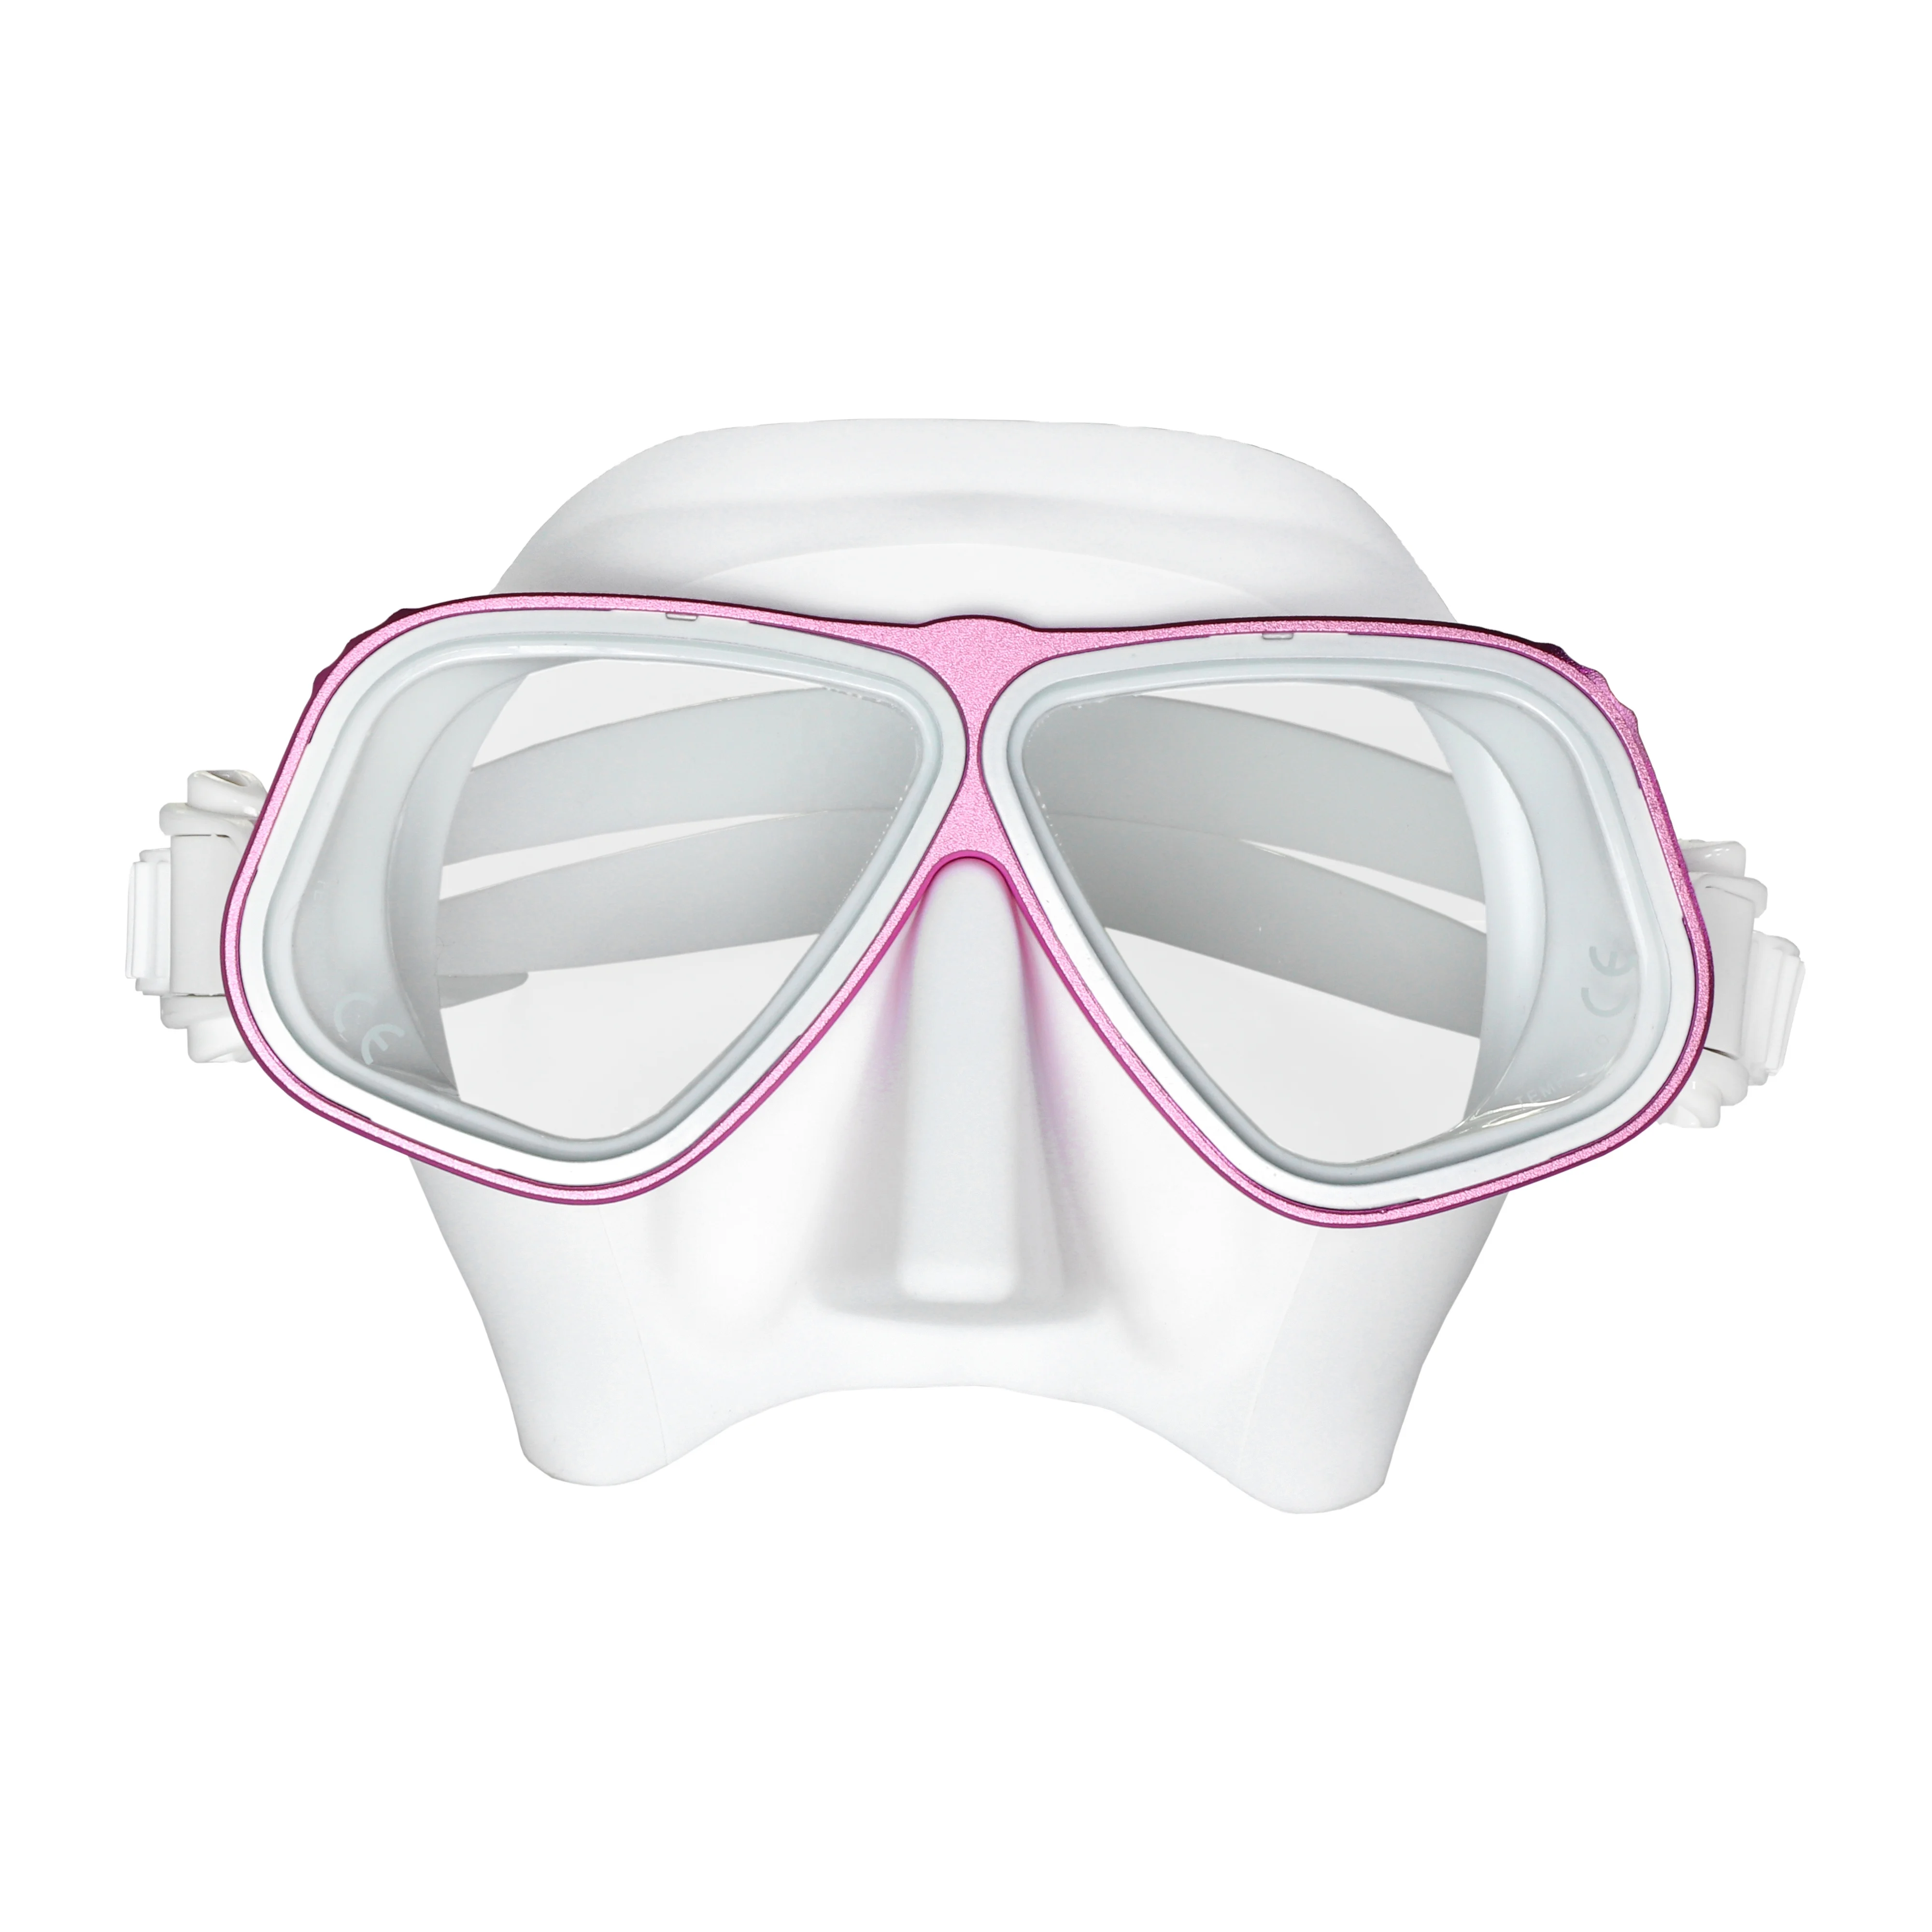 

New Arrival Custom Logo Color Diving Half Face Snorkel Mask Waterproof Metal Frame Clear Silicone Free Diving Mask, Yellow blue black pink red etc customized color supported